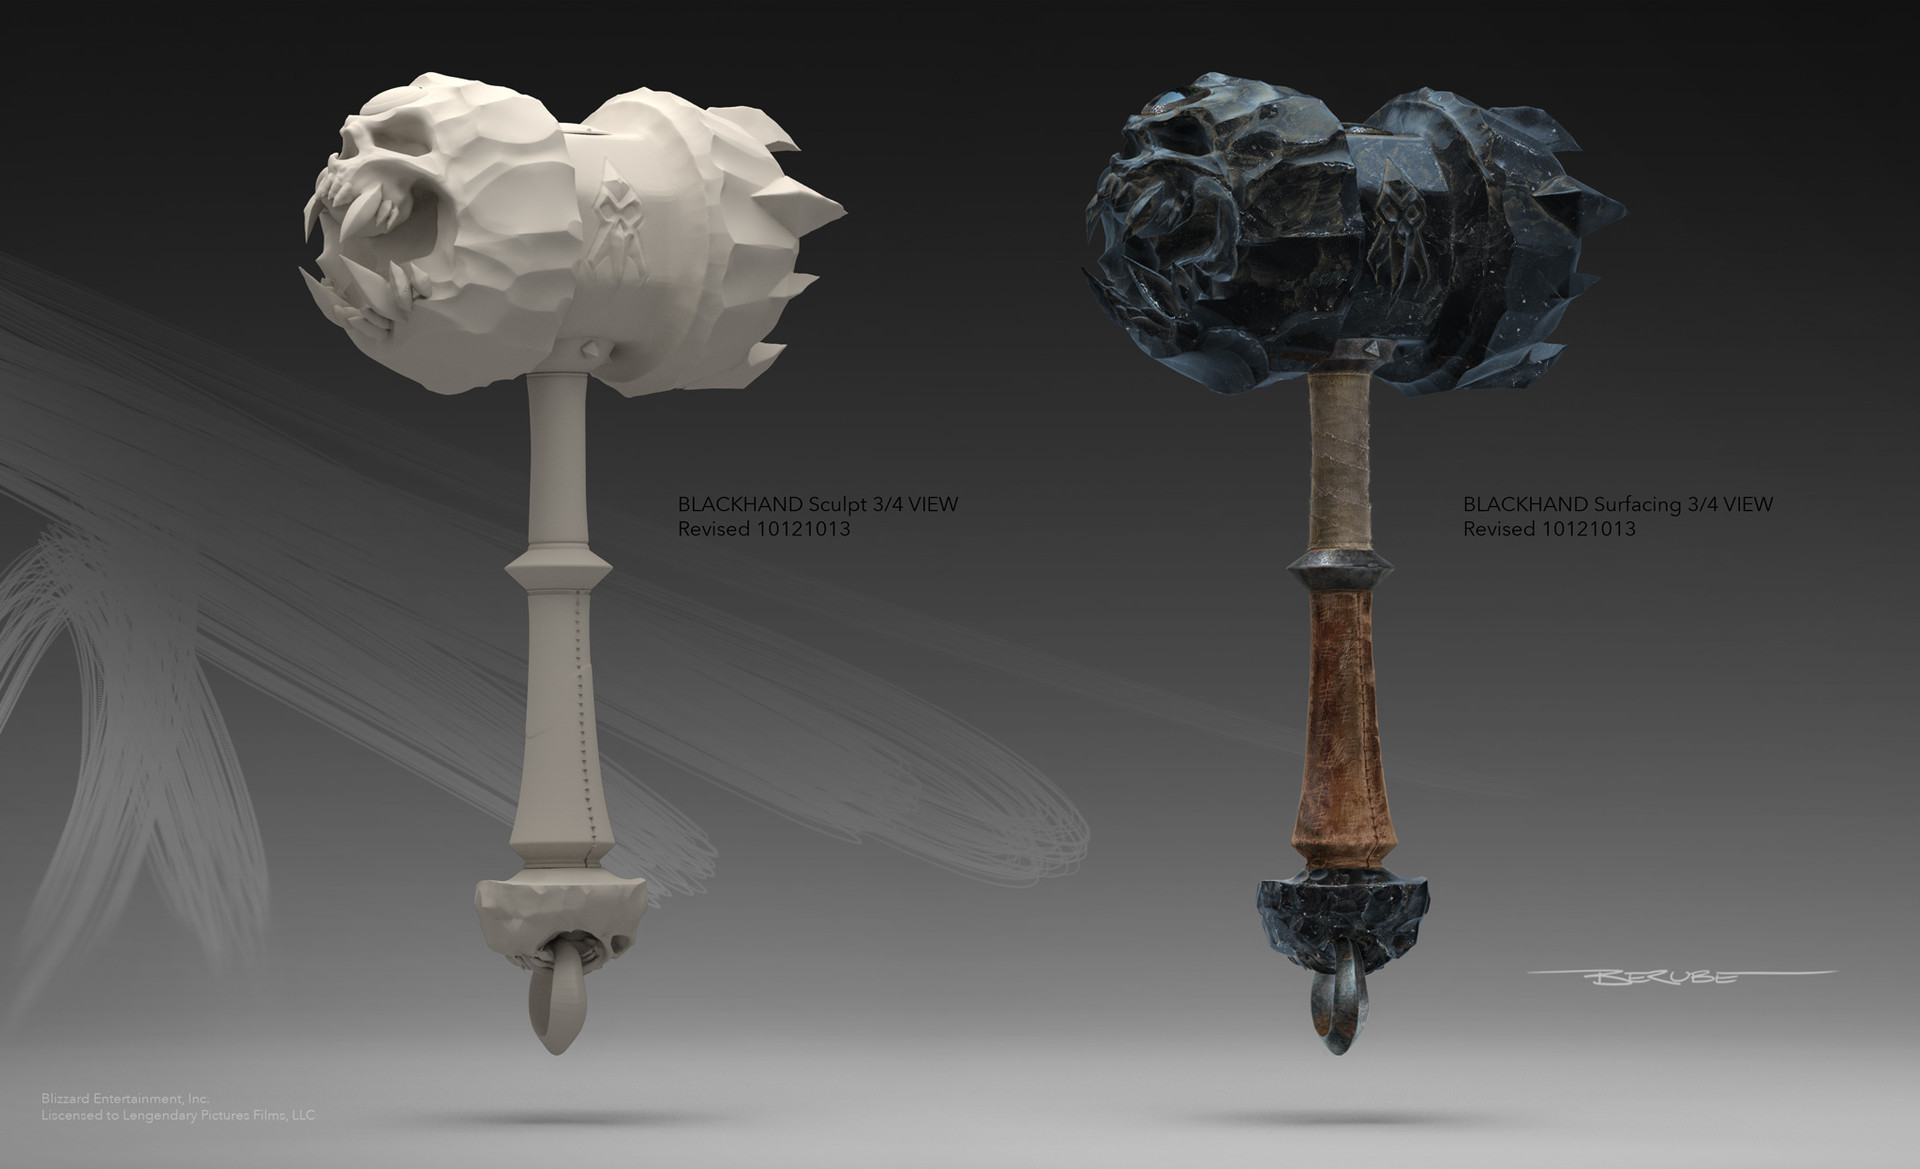 Fine Art: The Weapons Of The WarCraft Movie